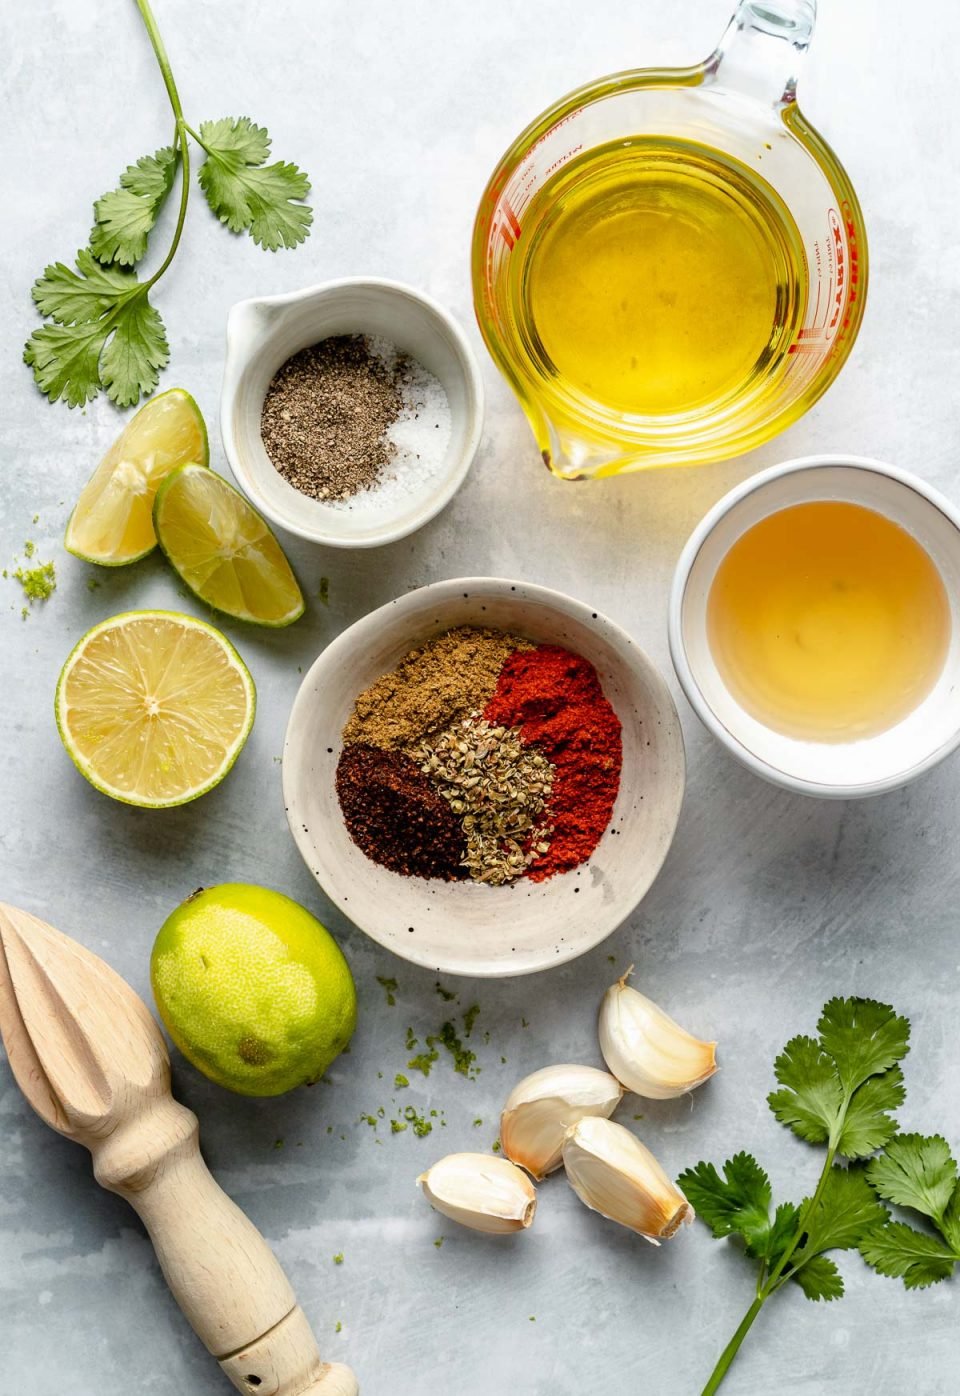 Ingredients are arranged on a light blue surface: olive oil, limes, garlic, agave, ancho chile powder, ground cumin, smoked paprika, dried oregano, salt, & pepper. A wooden citrus juicer & fresh cilantro leaves rest among the ingredients.